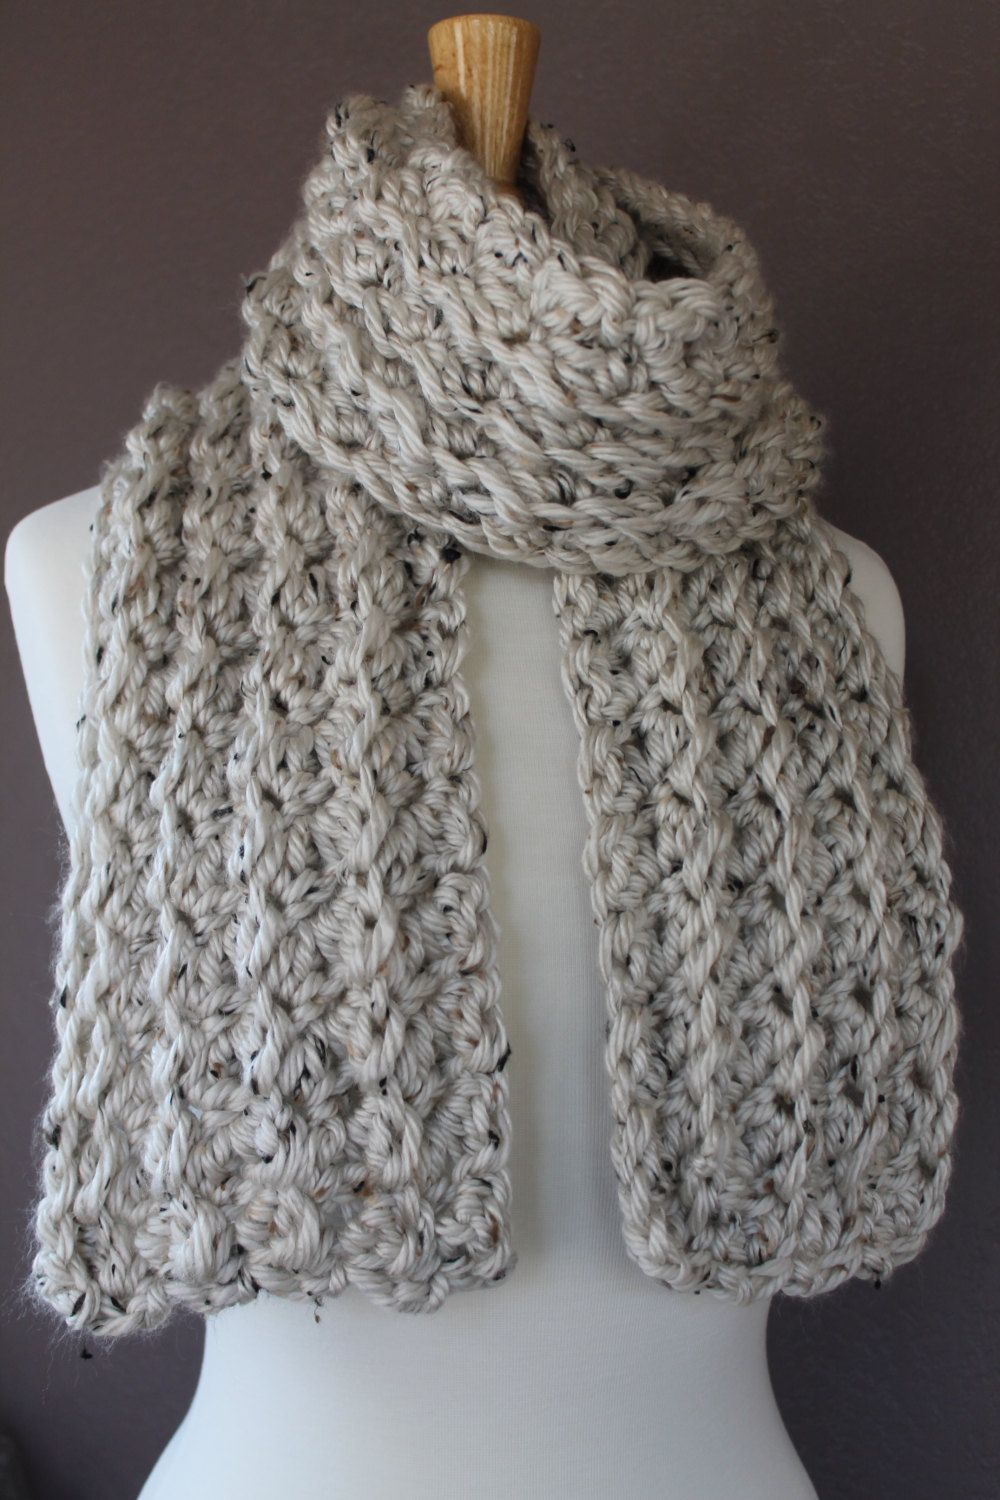 Easy Scarf Crochet Pattern Come And Check Out This Very Easy Crochet Scarf Pattern From Crafty